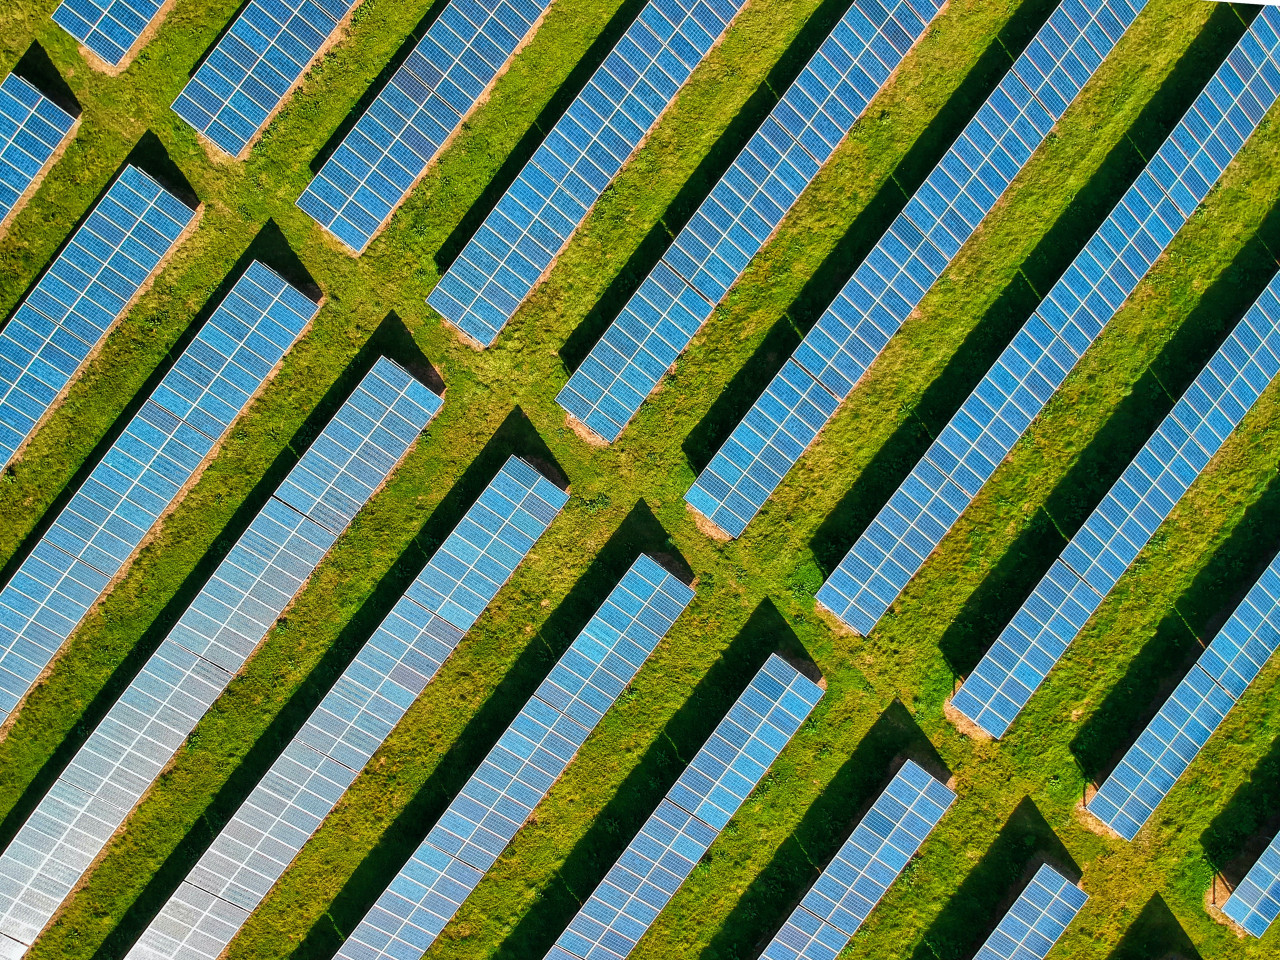 Spain's X-Elio proposes 350 MW solar plant with 120 MW / 240 MWh big battery in Queensland